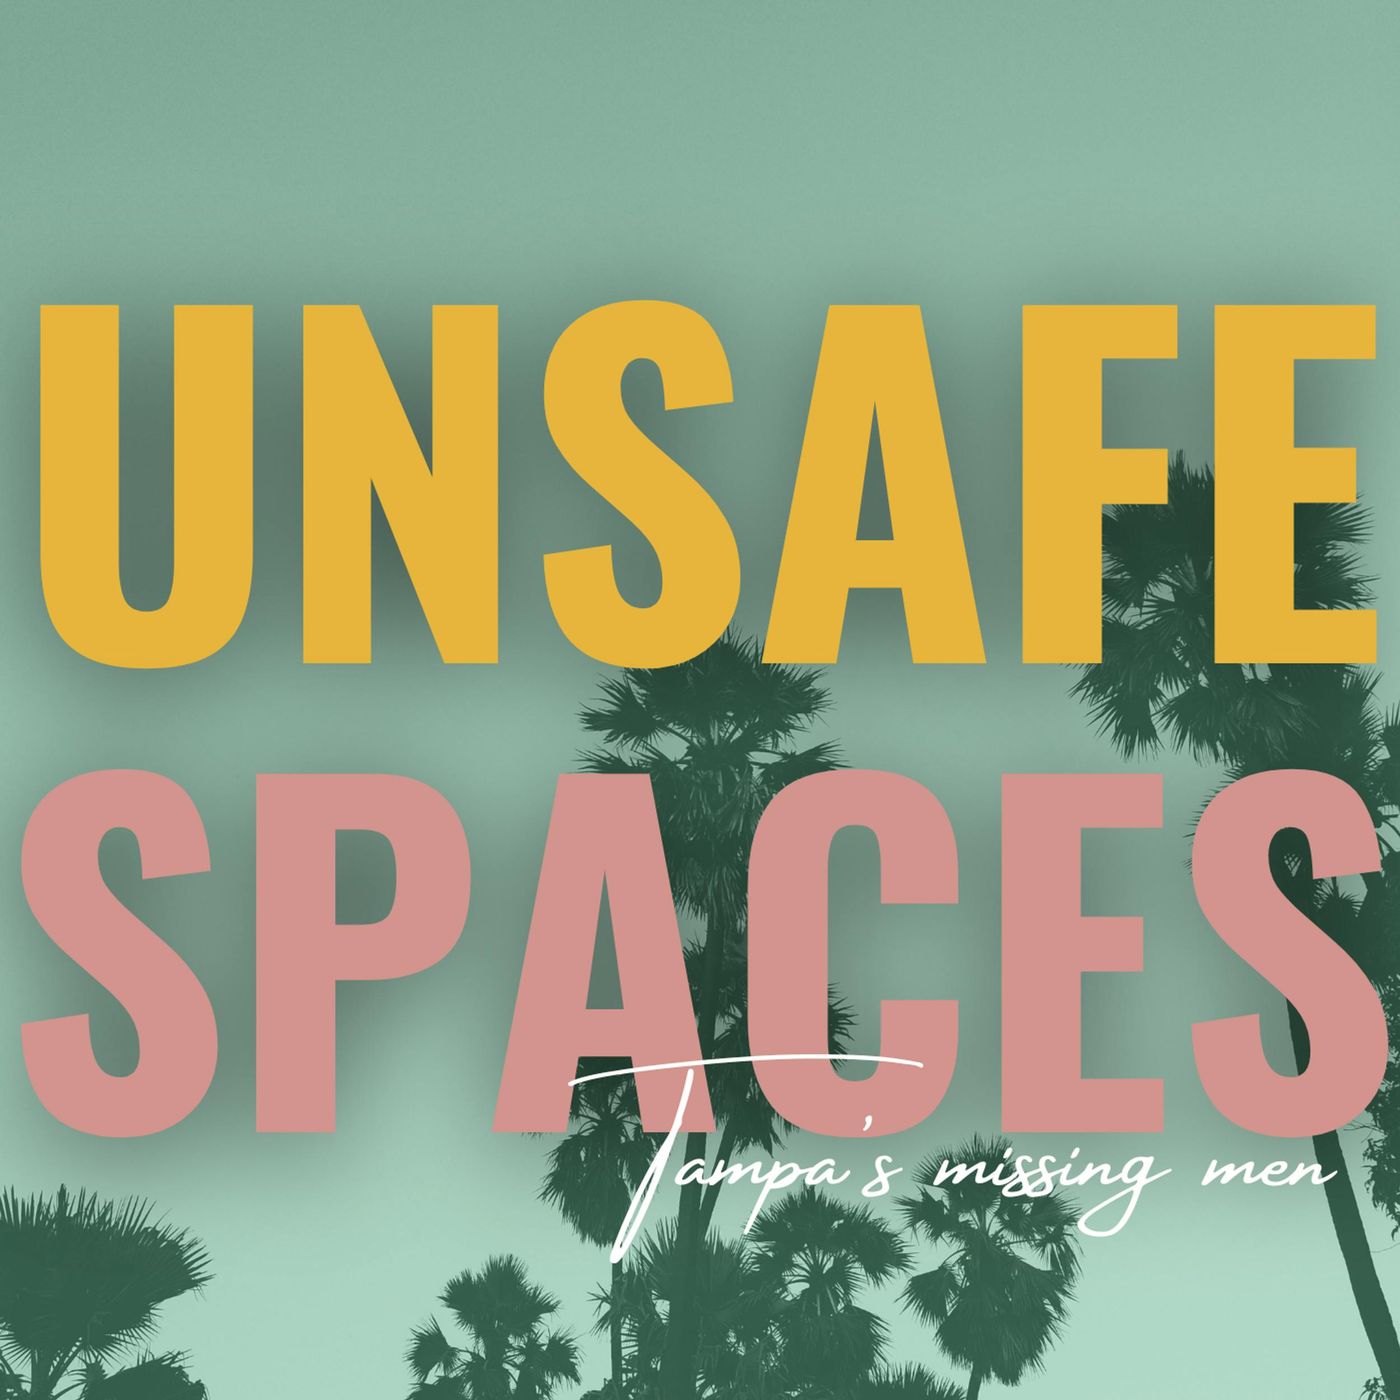 Introducing: Unsafe Spaces